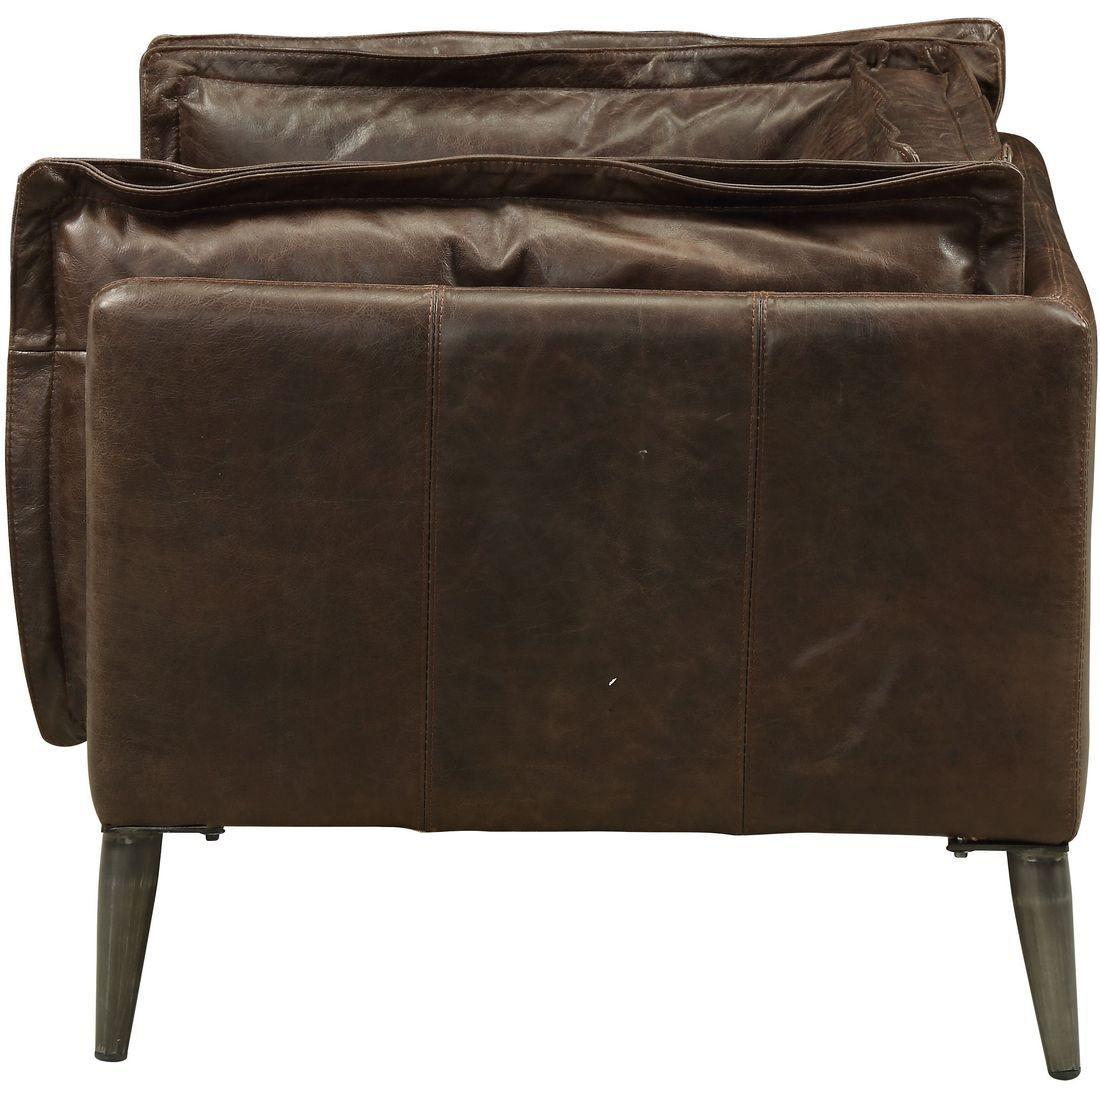 

        
Acme Furniture Porchester-52482 Oversized Chair Chocolate Top grain leather 0840412163517
